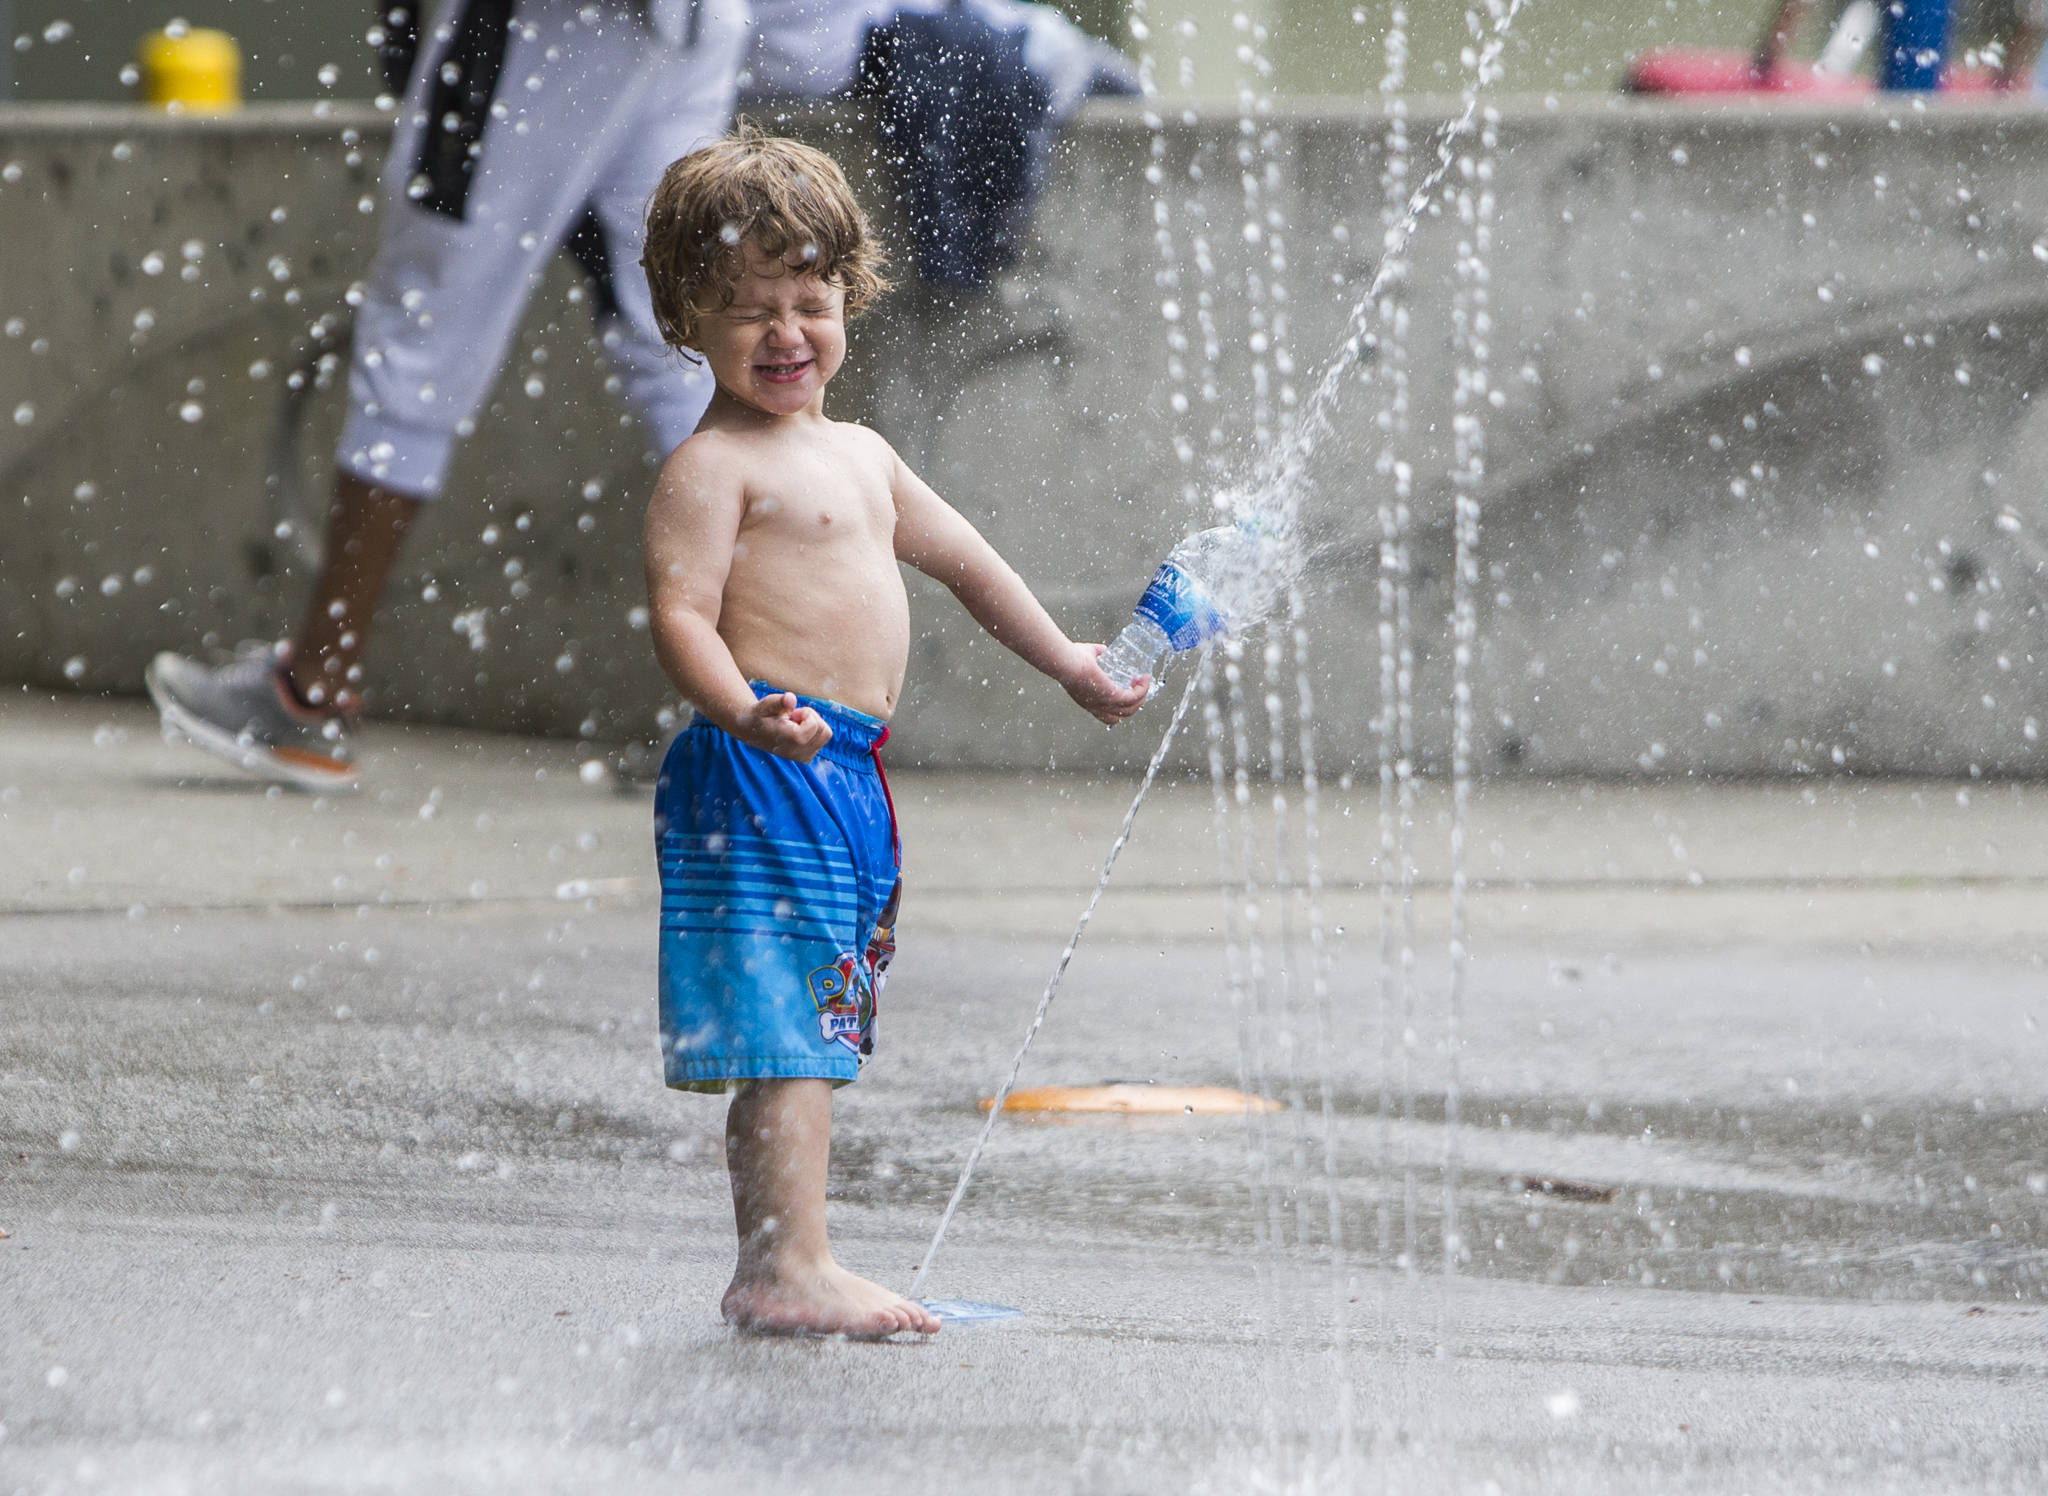 Wyatt Podoll, 2, plays in the Rotary Centennial Water Playground at Forest Park in Everett on Saturday. The splash pad reopened over the Memorial Day weekend as COVID restrictions were eased. (Olivia Vanni / The Herald)